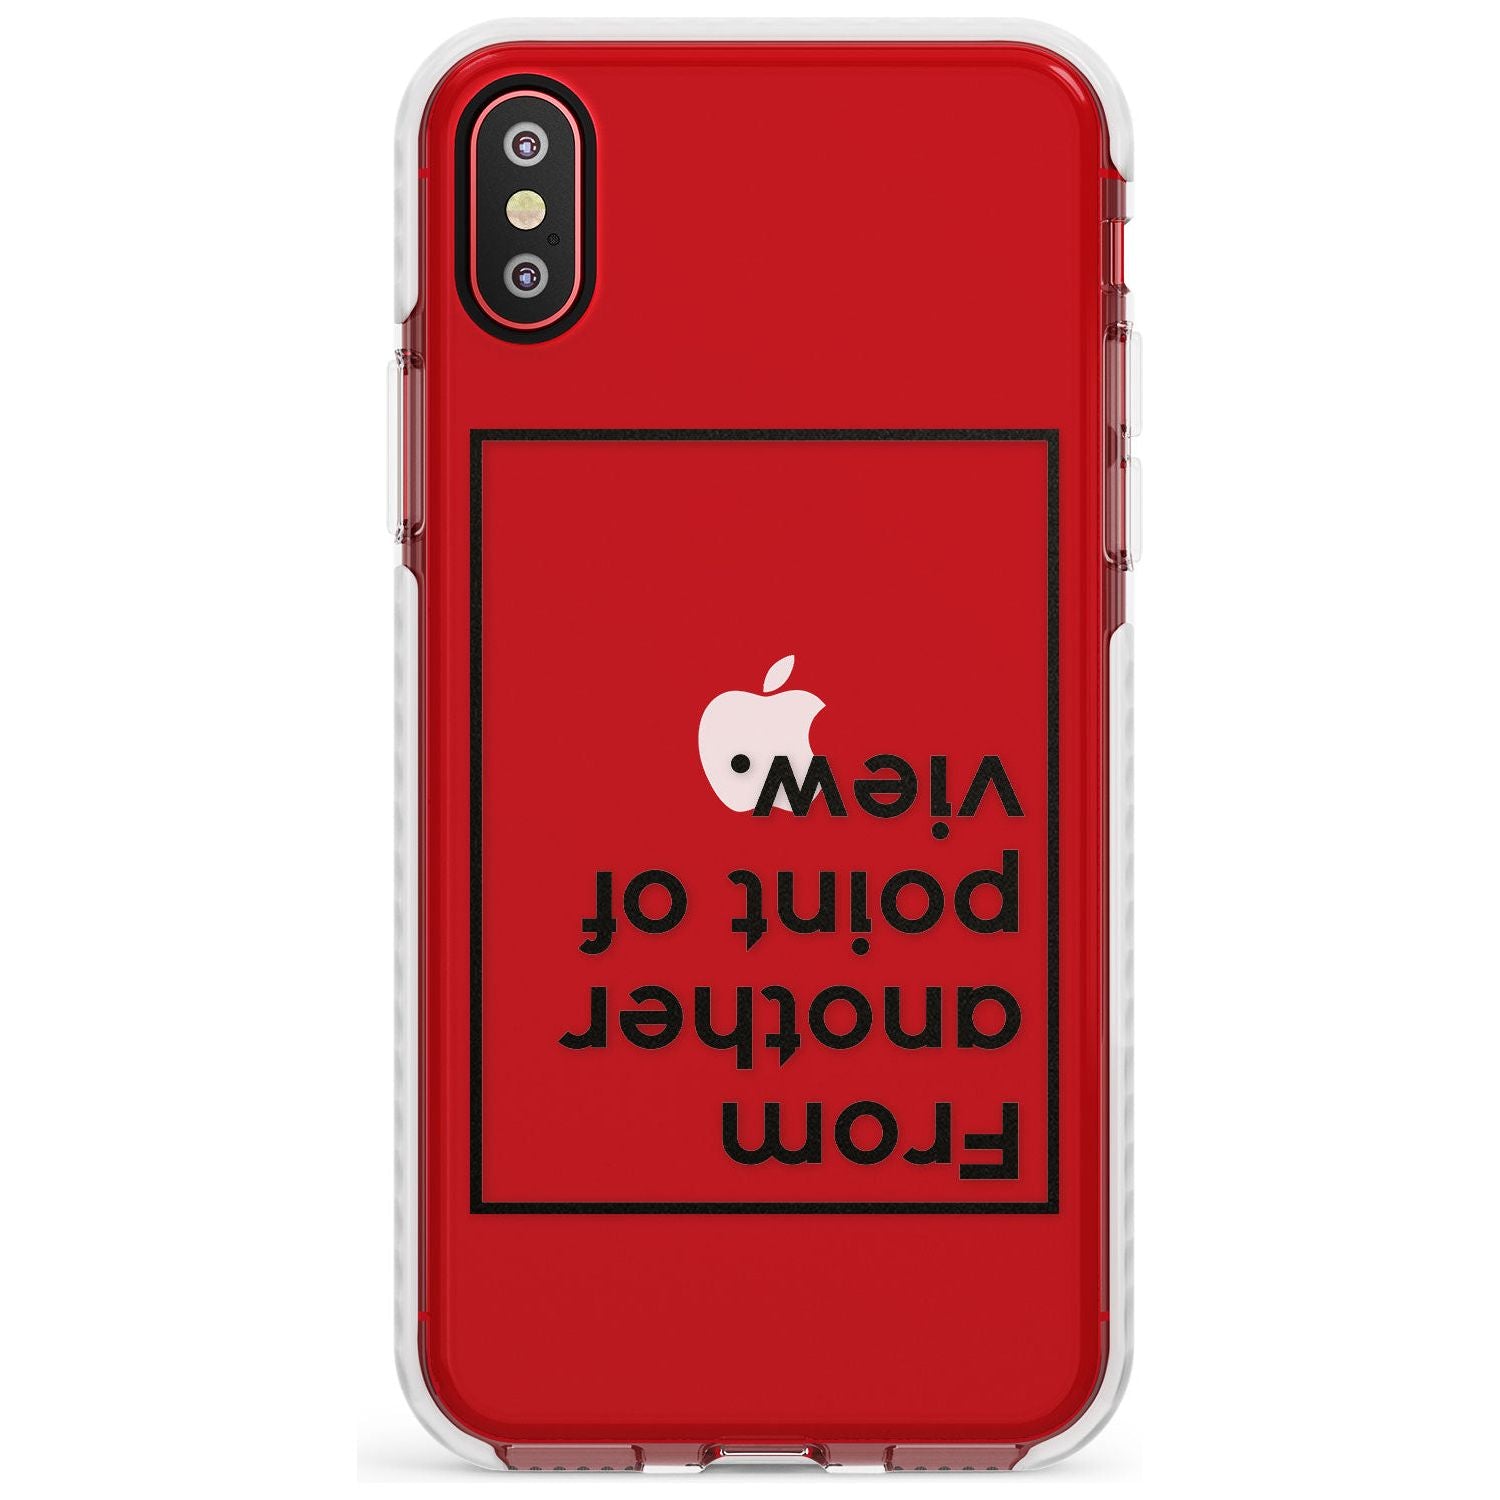 Another Point of View Slim TPU Phone Case Warehouse X XS Max XR